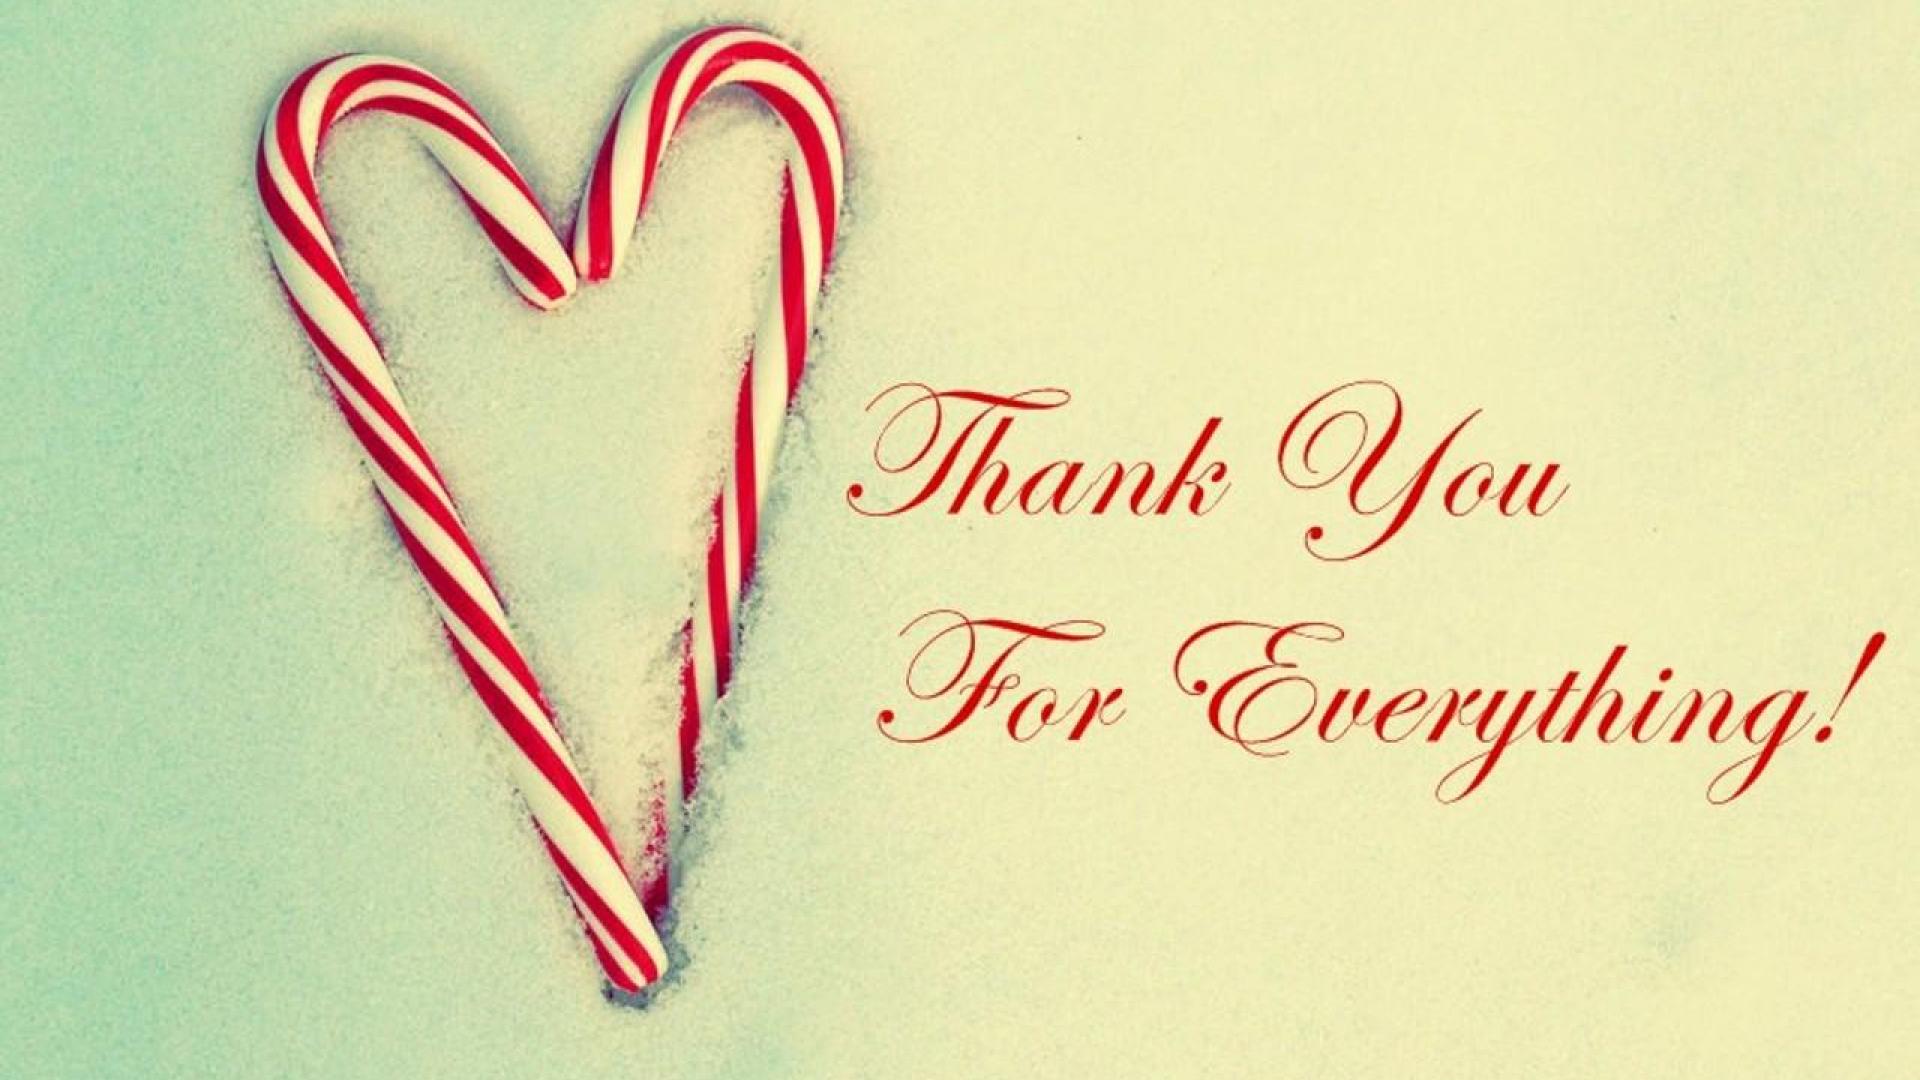 Thank You For Everything heart images hd pics free